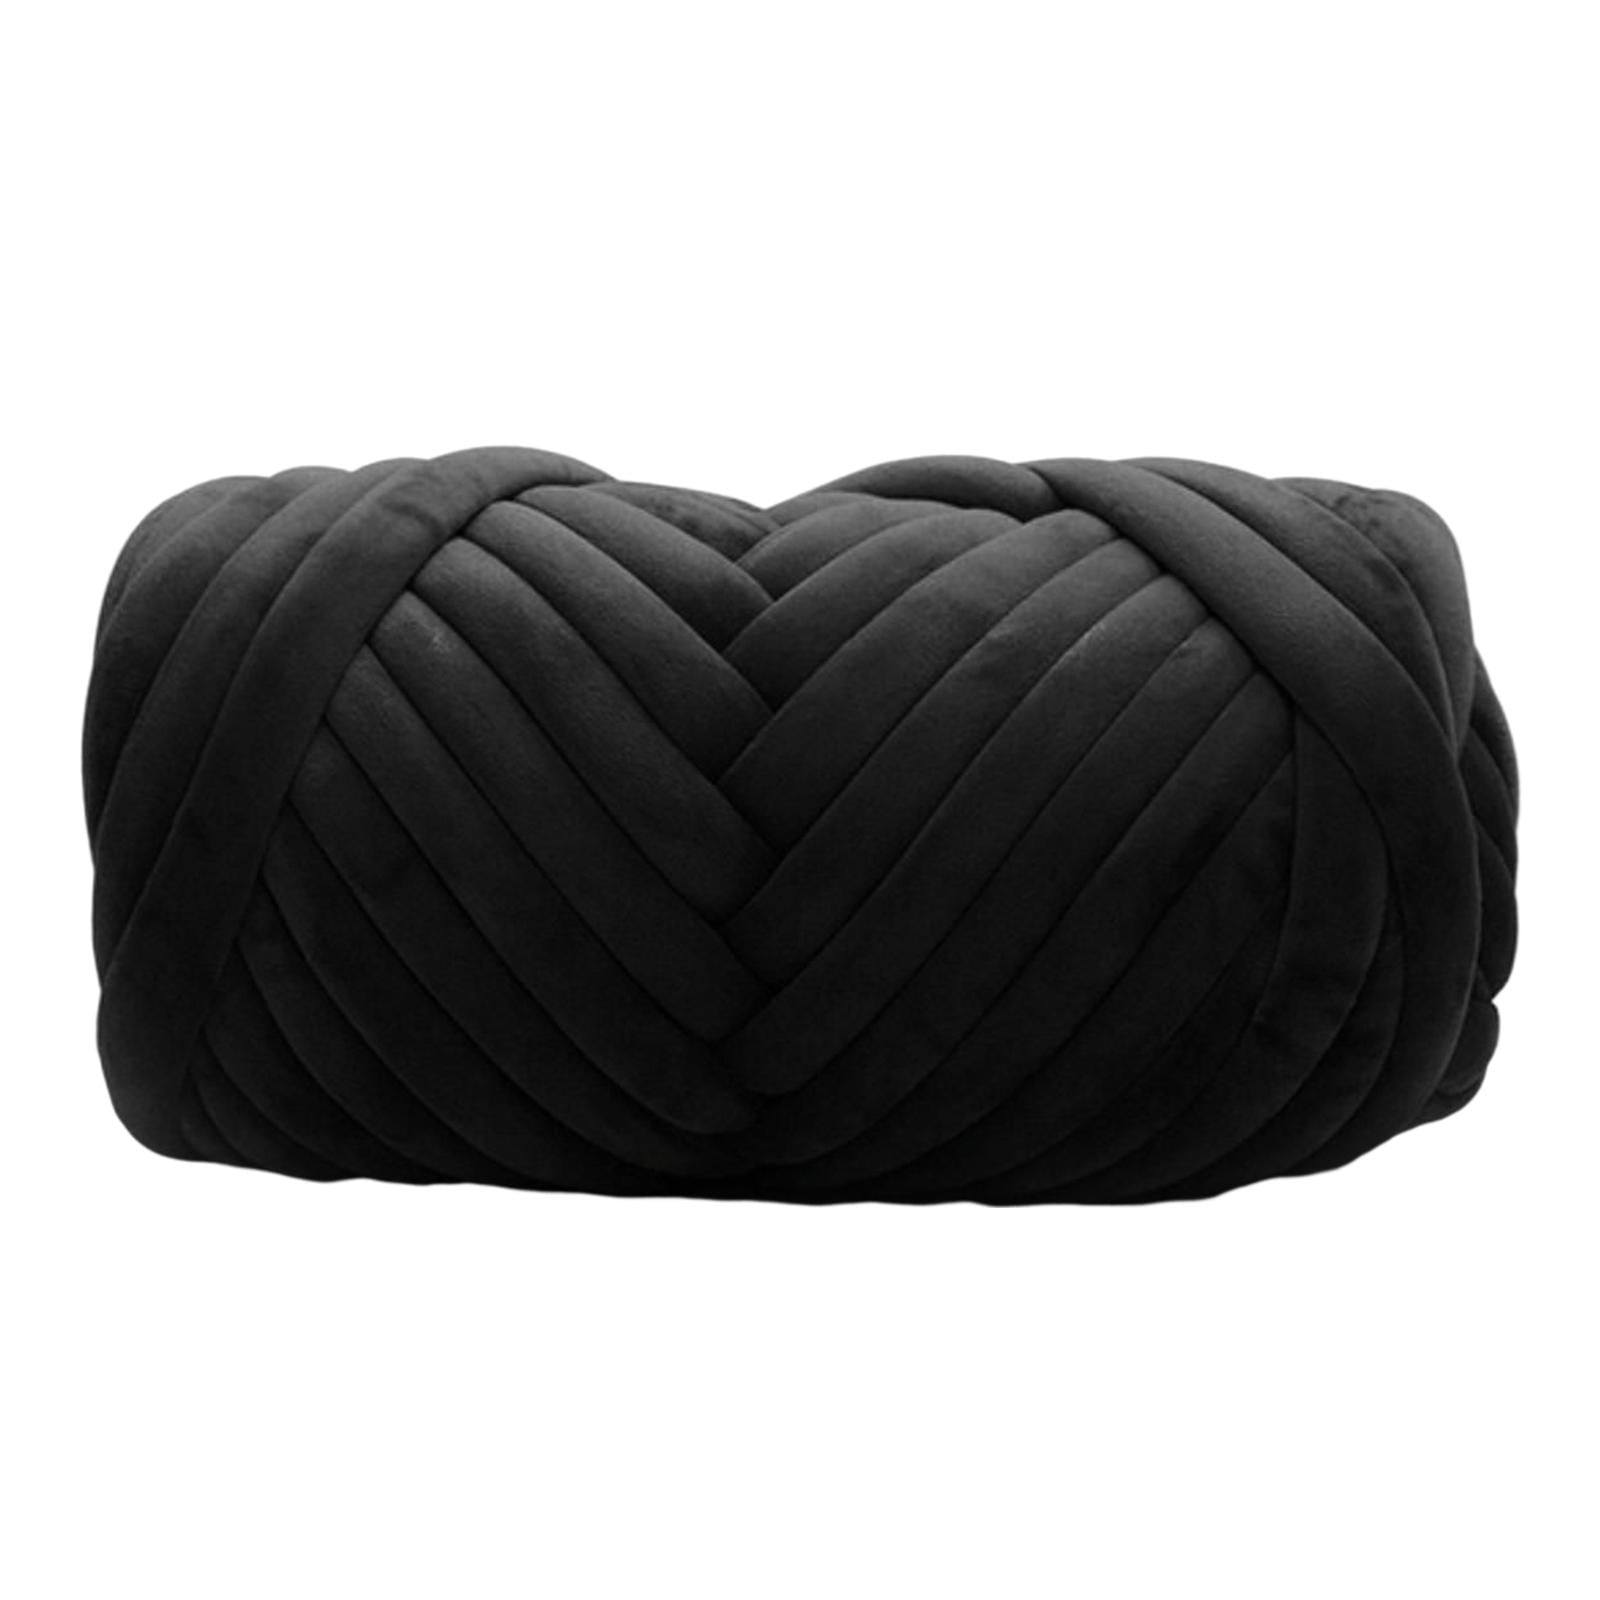 2 Pcs - Soft and Bulky Yarn for Knitting Thick & Quick Yarn Crochet and  Knitting Assorted Yarn Bulk for Adults and Kids%100 Micro Polyester (Black)